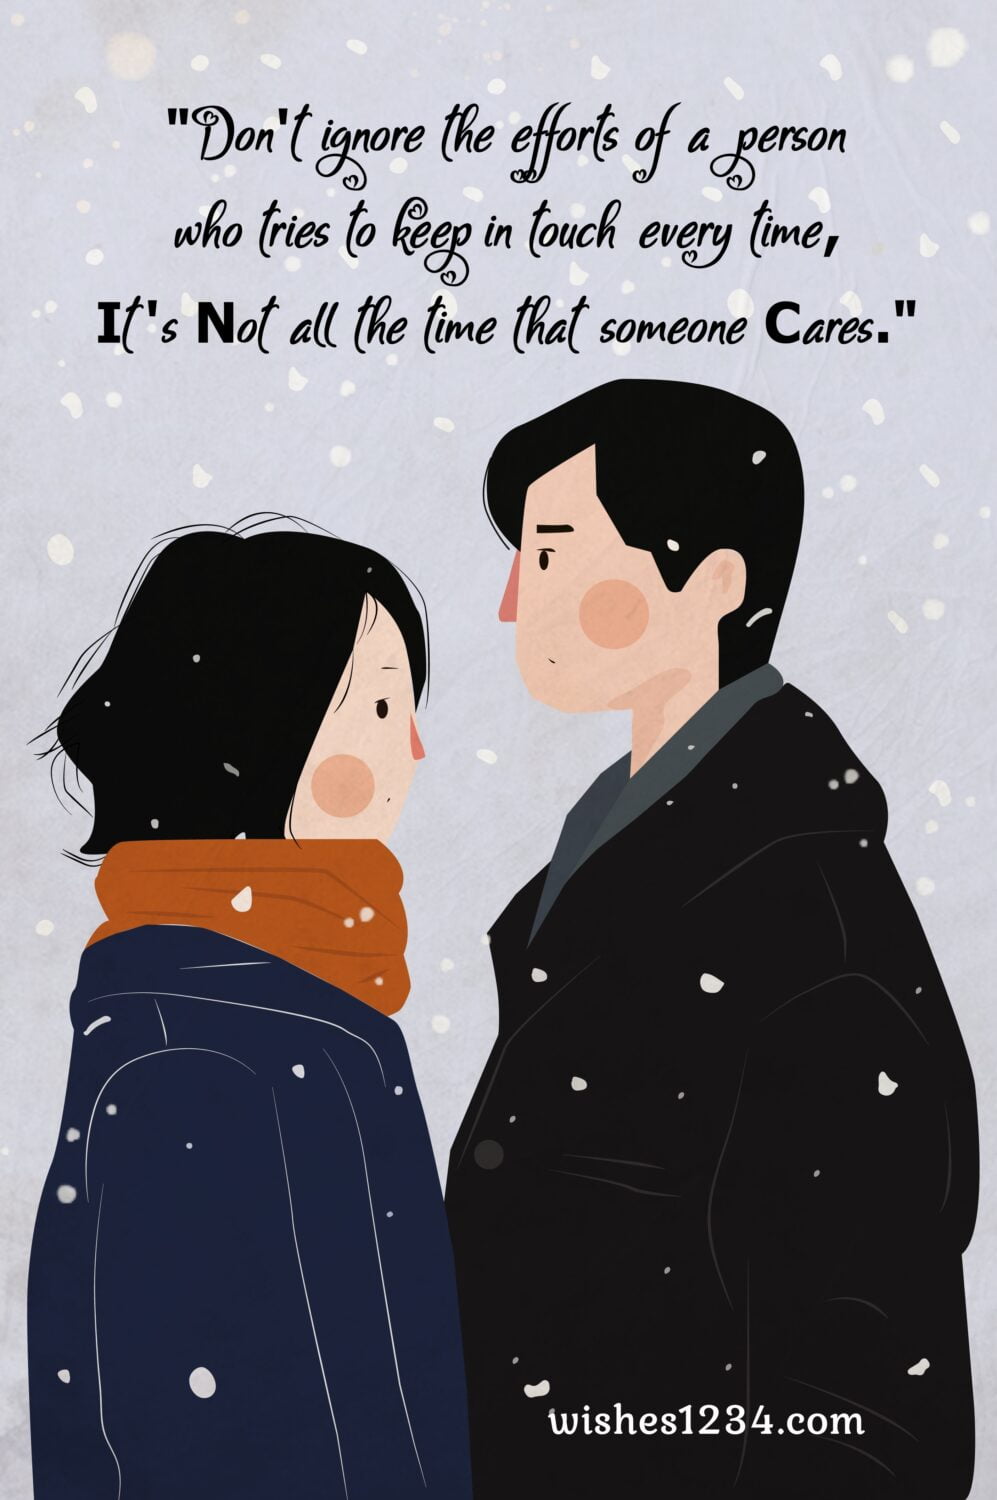 Couple in a snowstorm, Super motivational quotes | Unique quotes on life.